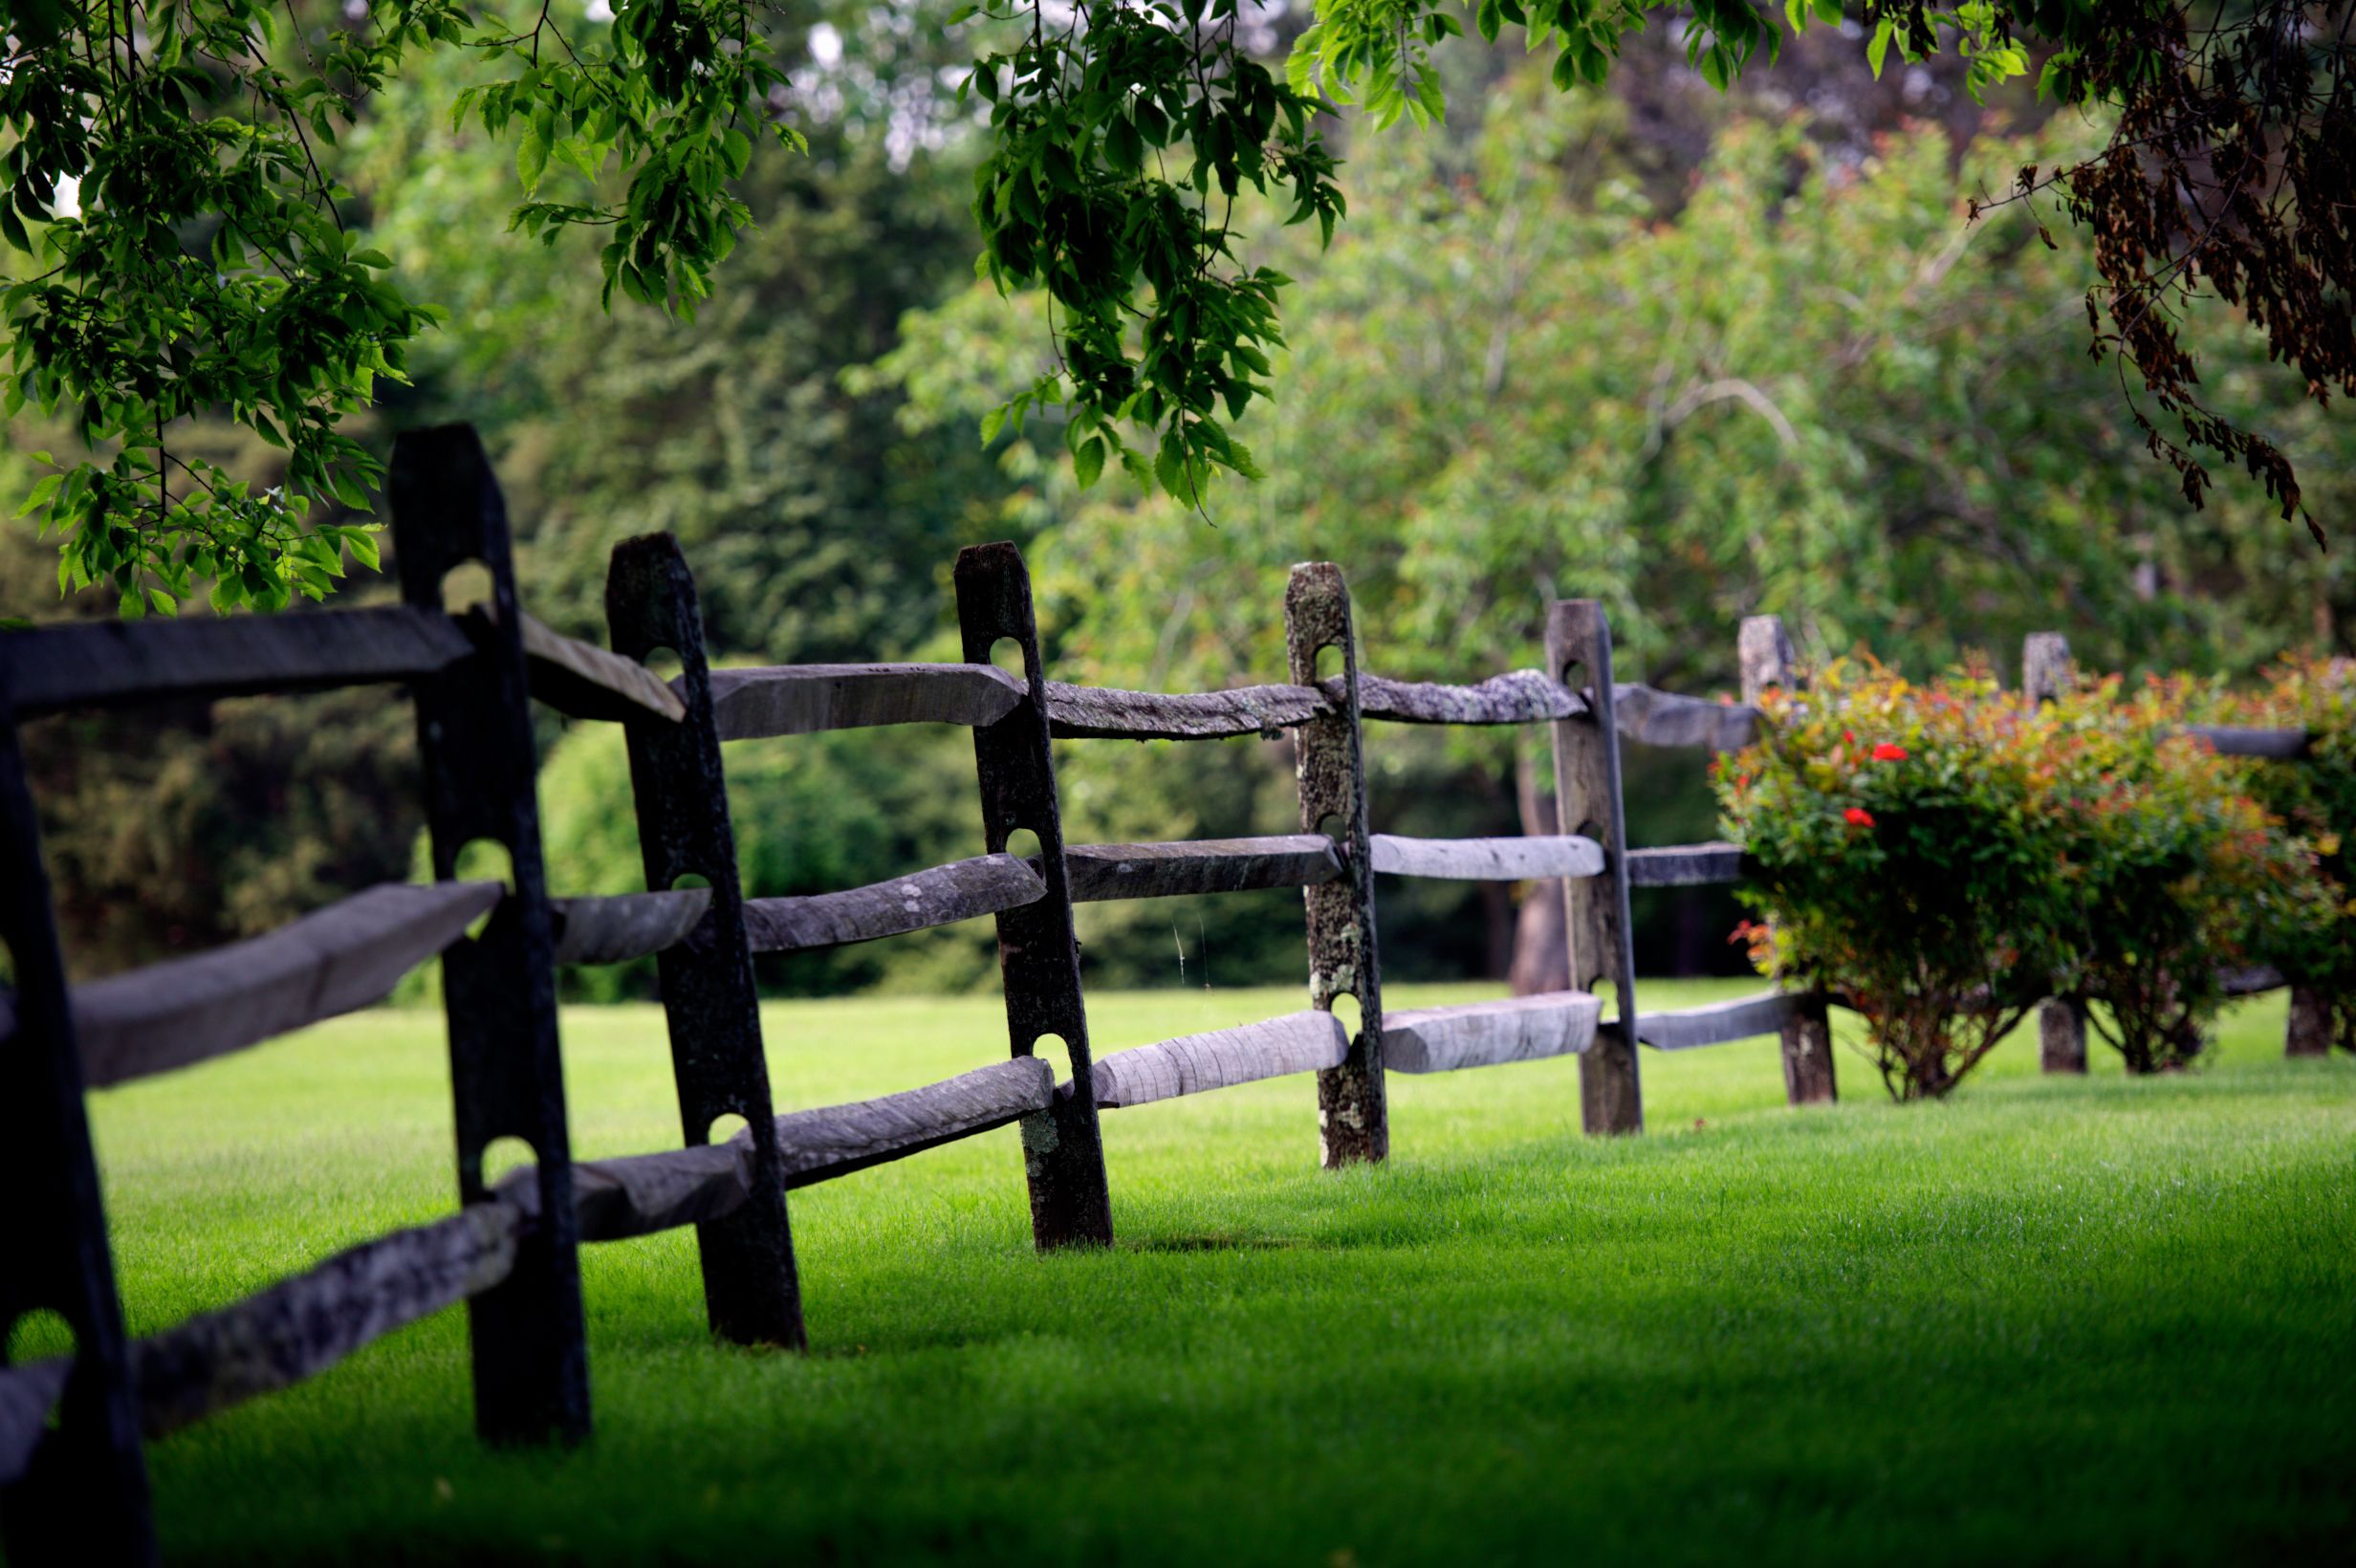 A scenic image of a fence extending from foreground into background with well manicured grass extending throughout